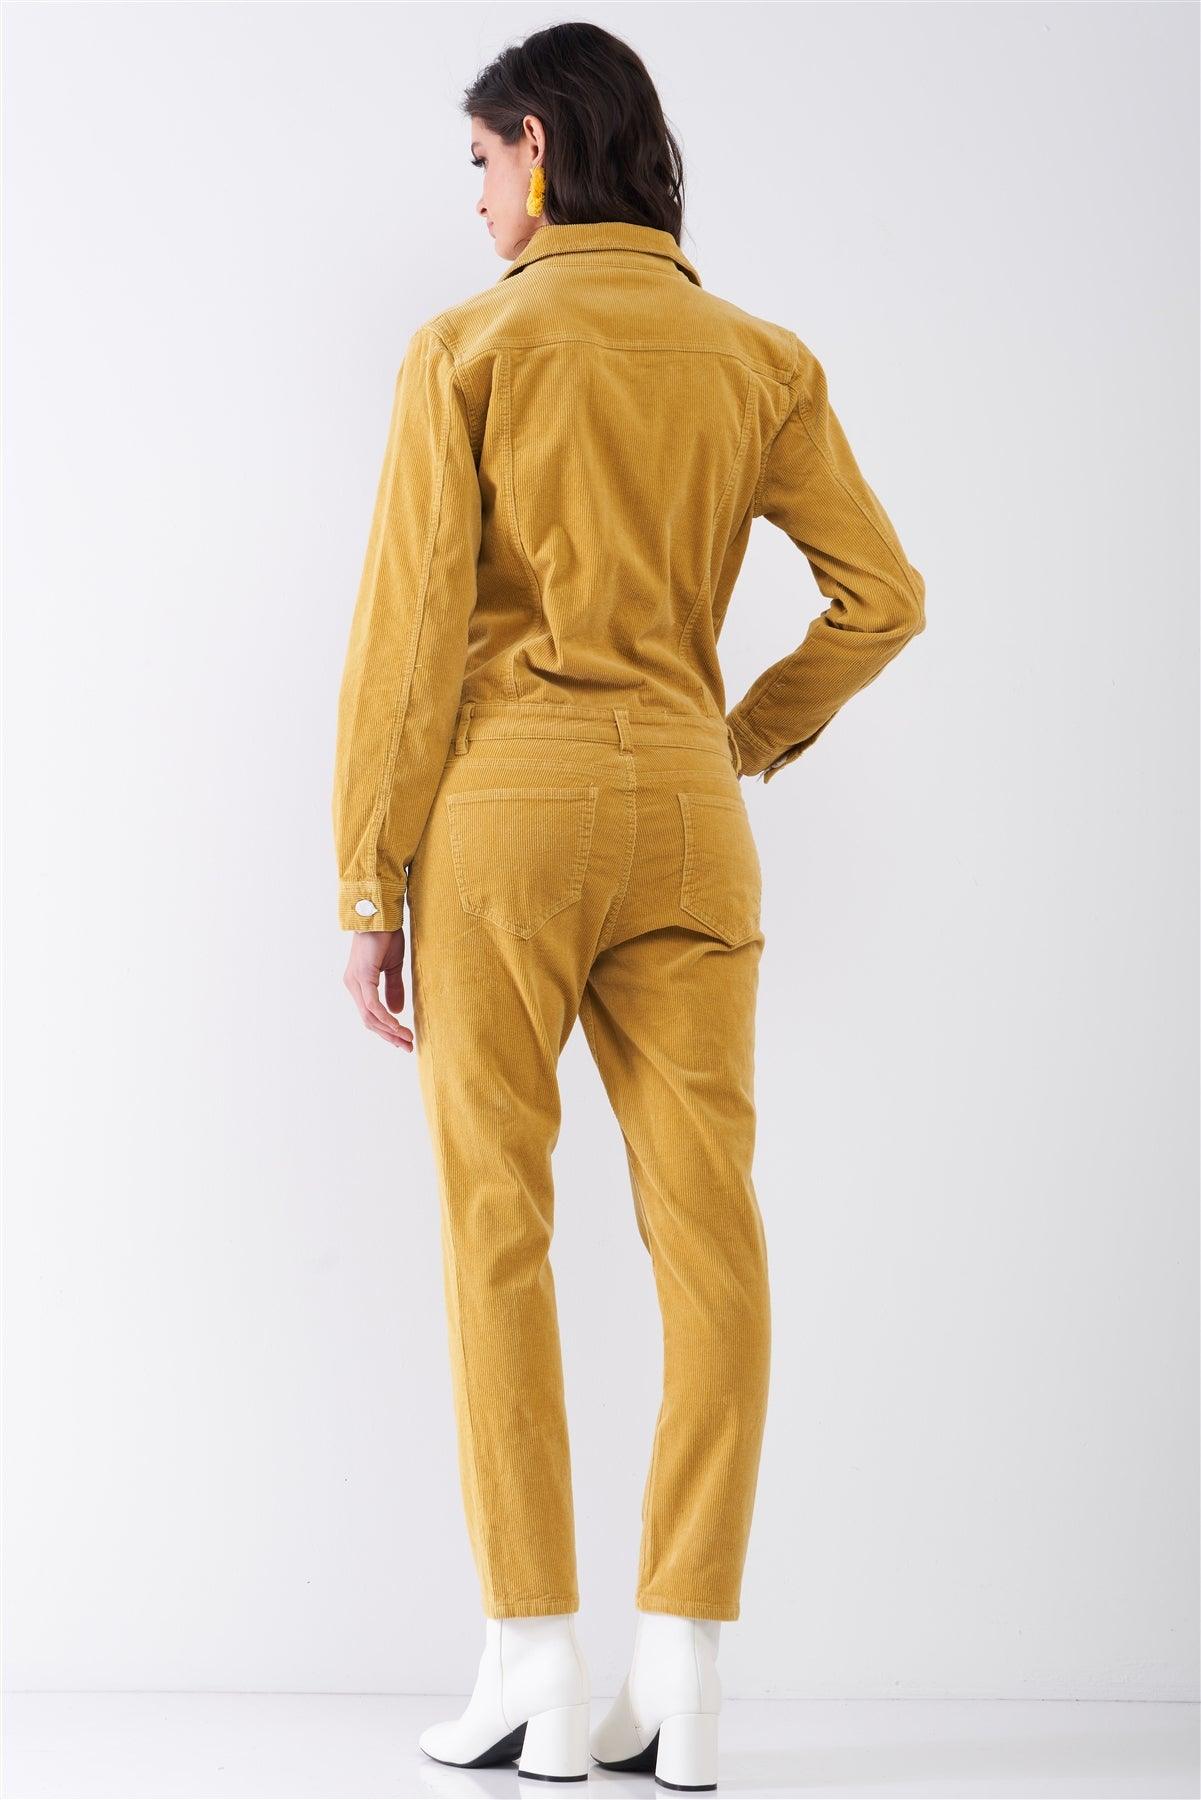 Bumblebee Yellow Corduroy Long Sleeve Button-Down Front Urban Utility Jumpsuit / 4-1-1